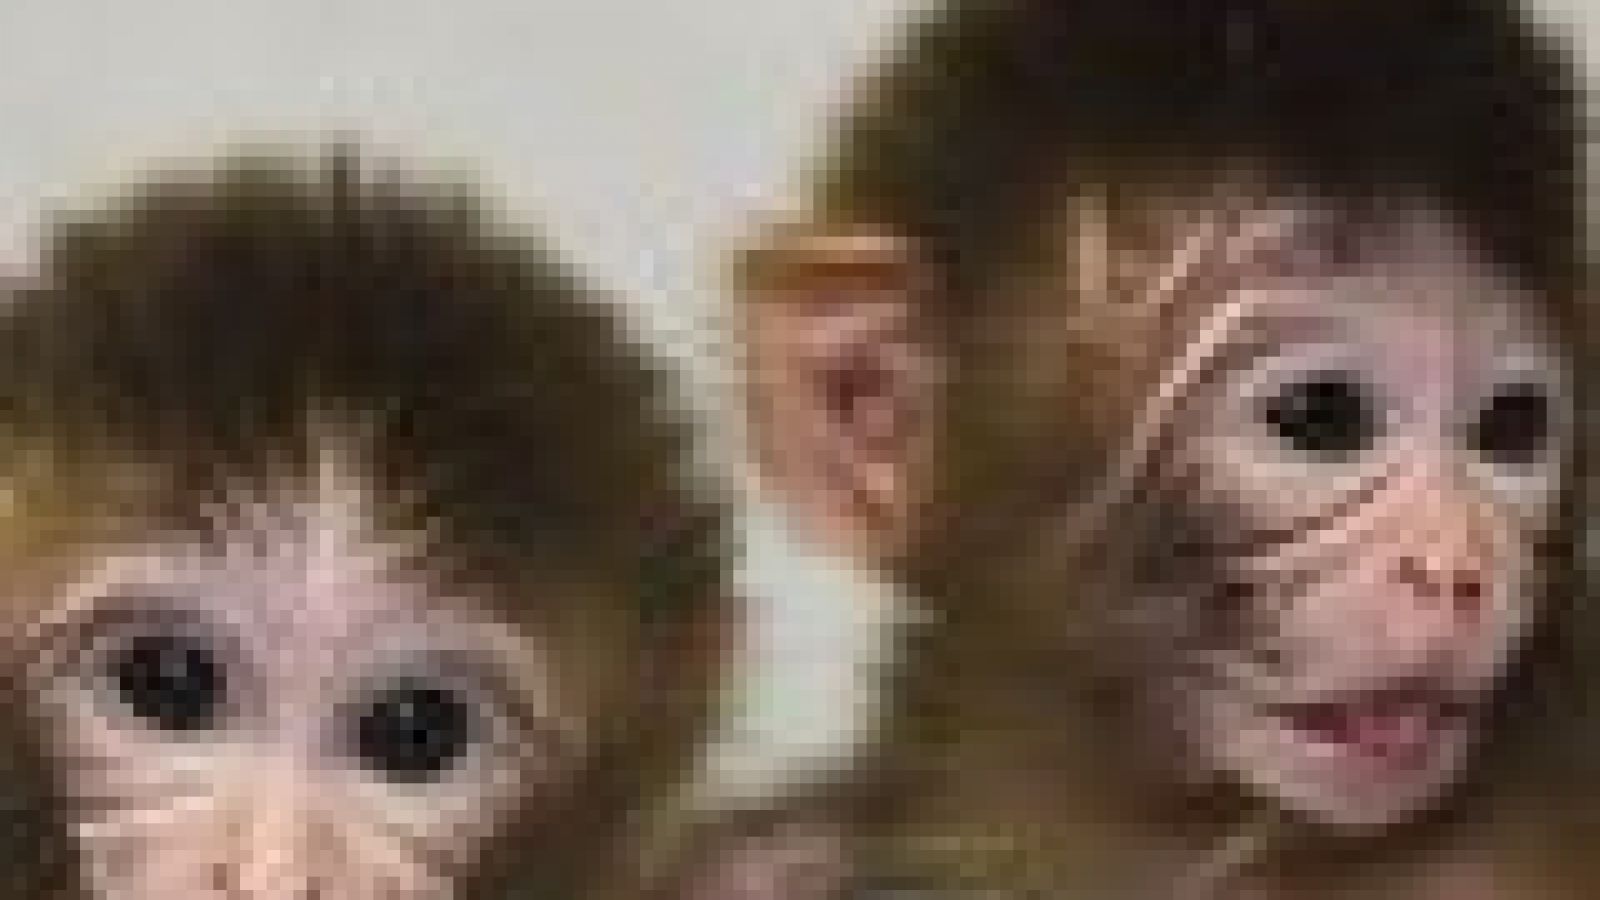 Monkeys with two mums may eradicate mitochondrial disorders